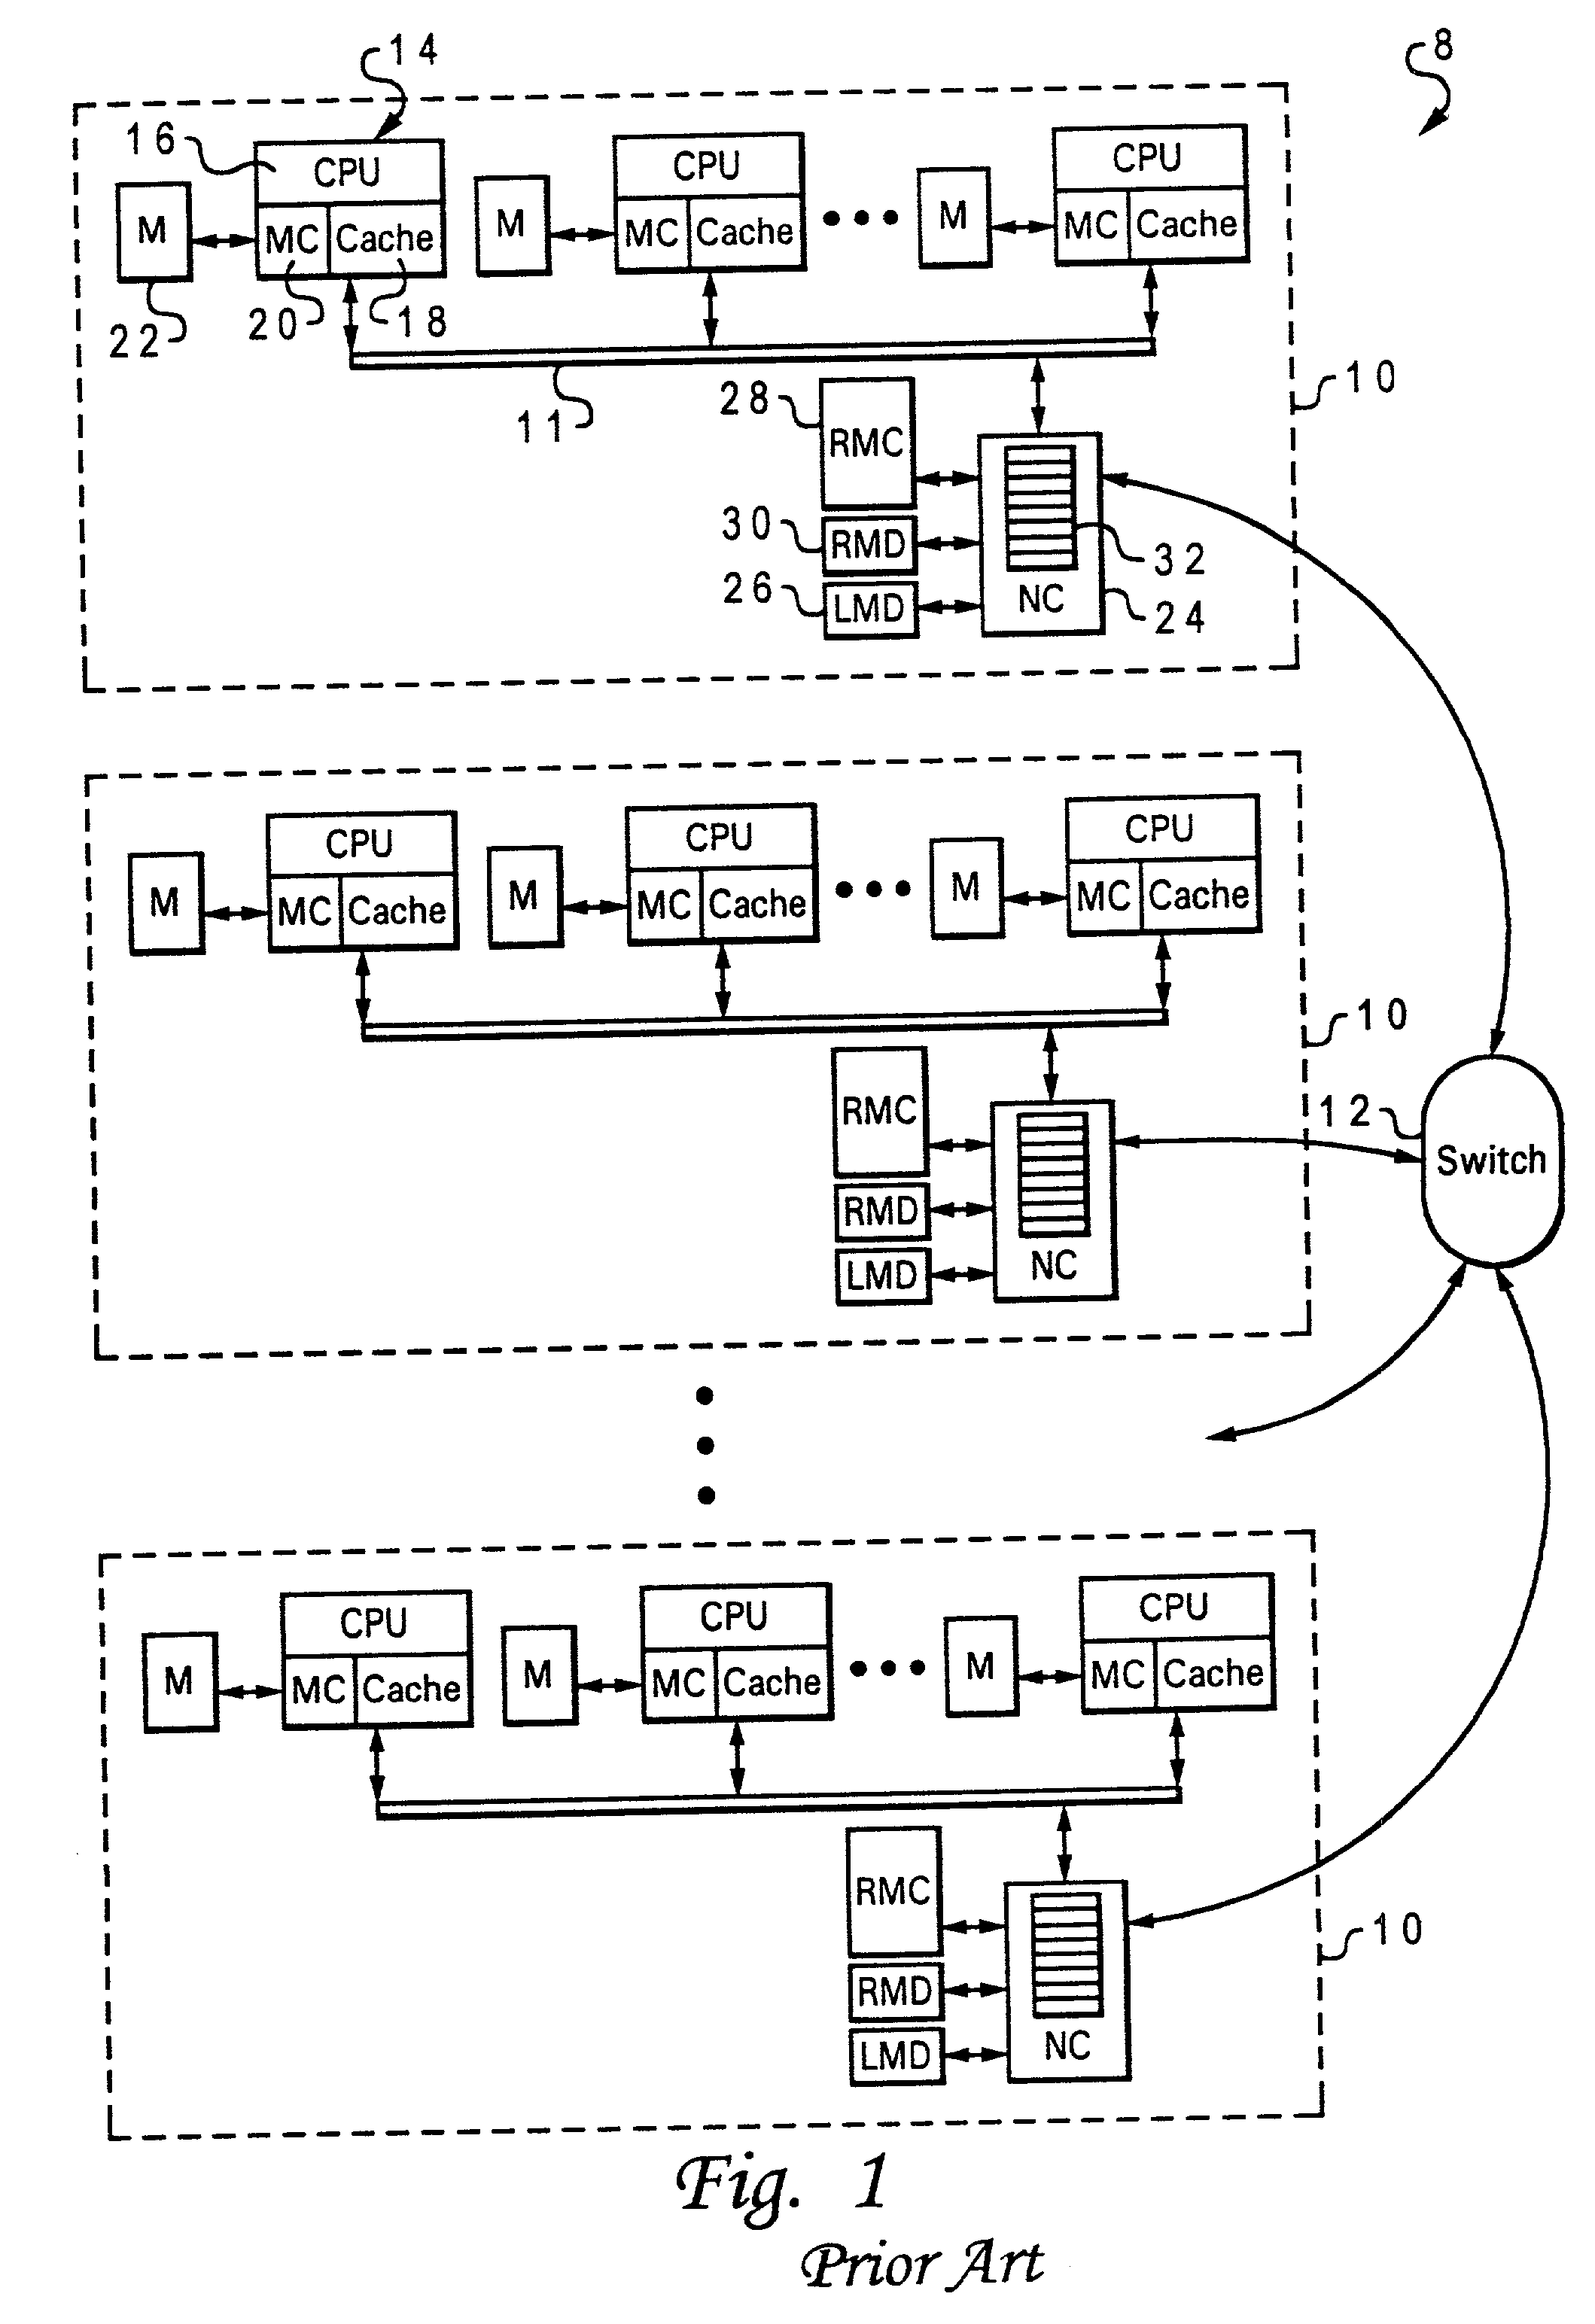 Two-stage request protocol for accessing remote memory data in a NUMA data processing system